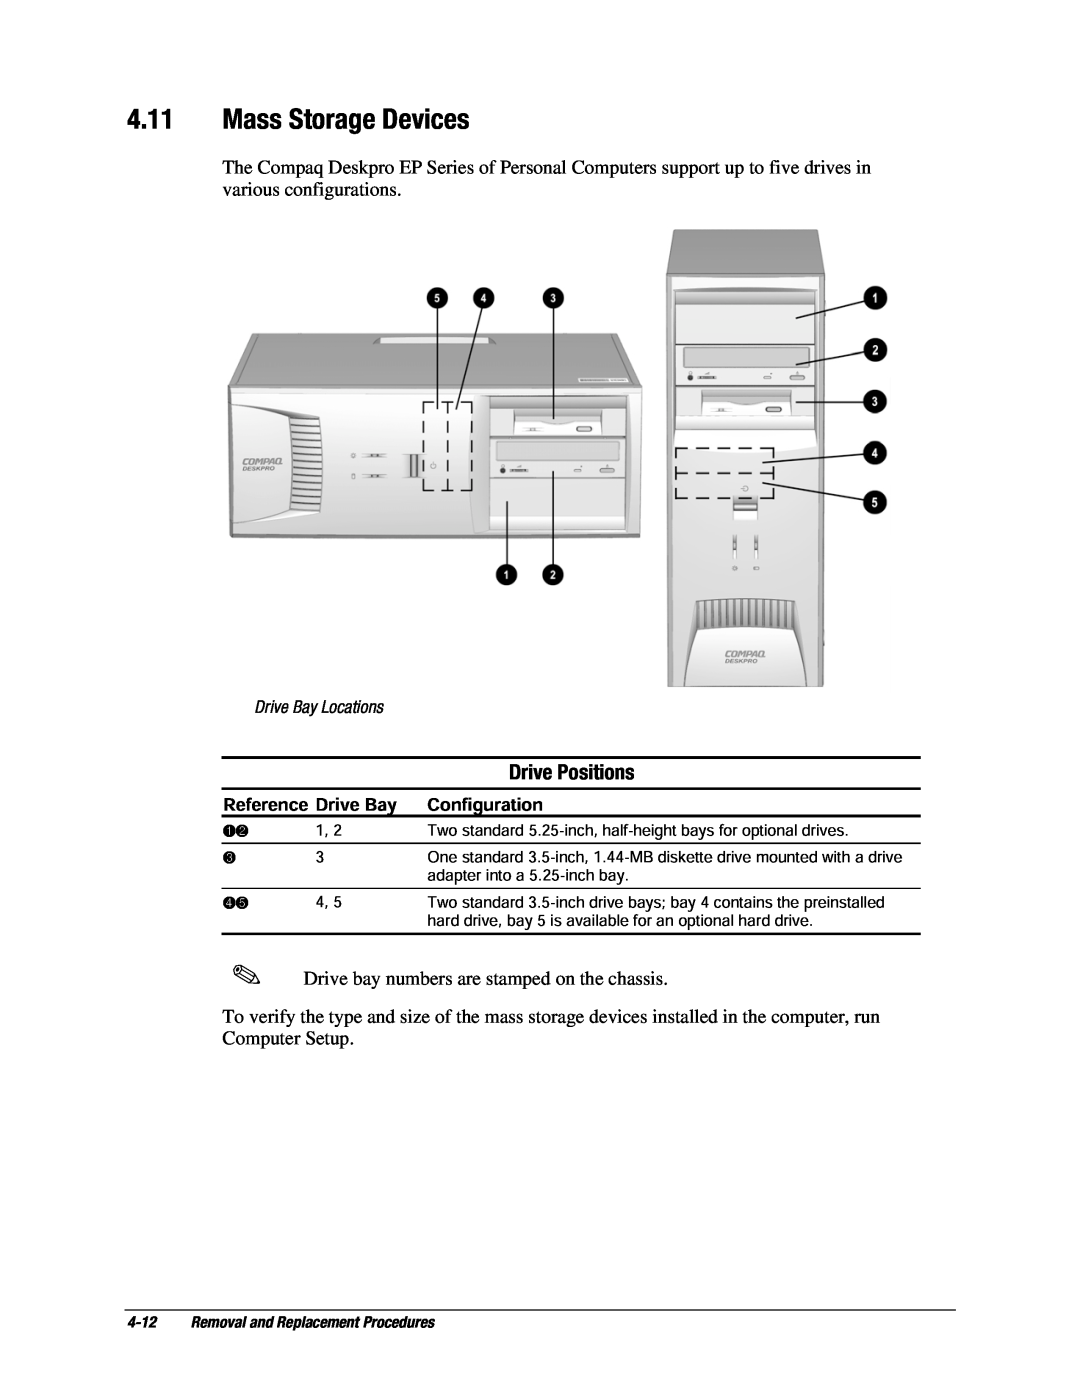 Compaq EP Series manual Mass Storage Devices, Drive Positions 